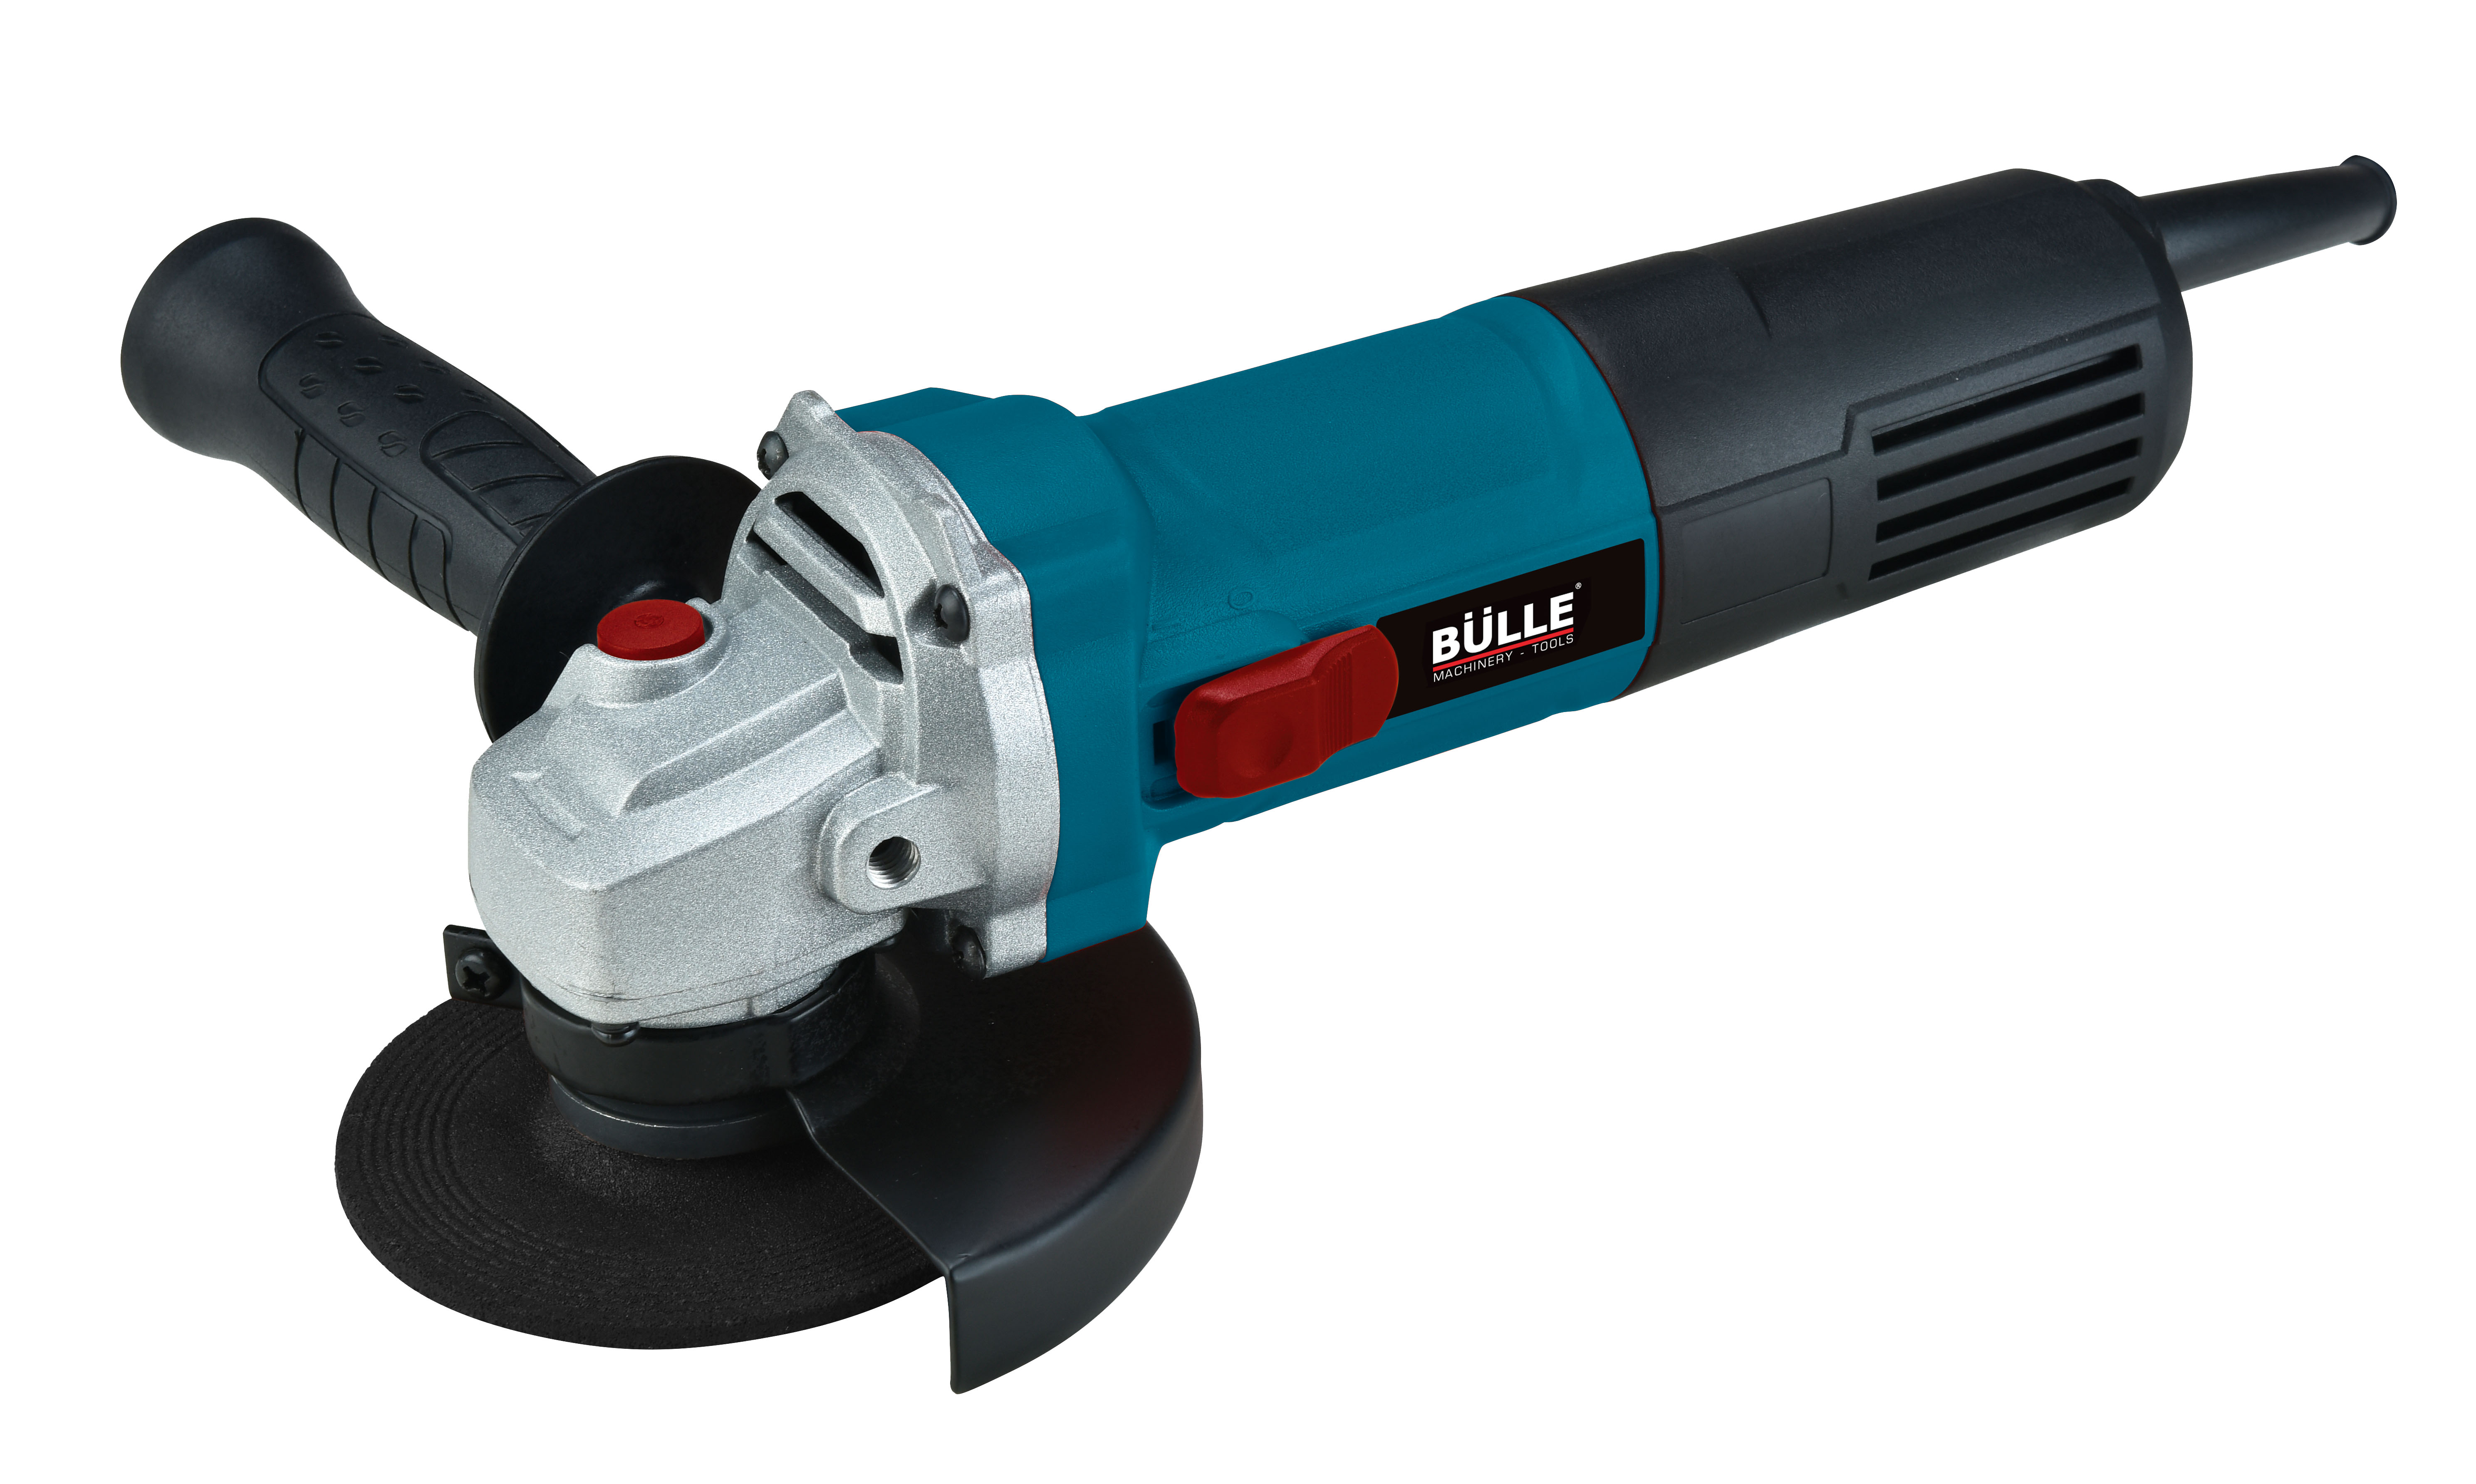 Professional Angle Grinder 850W Ø125mm Bulle